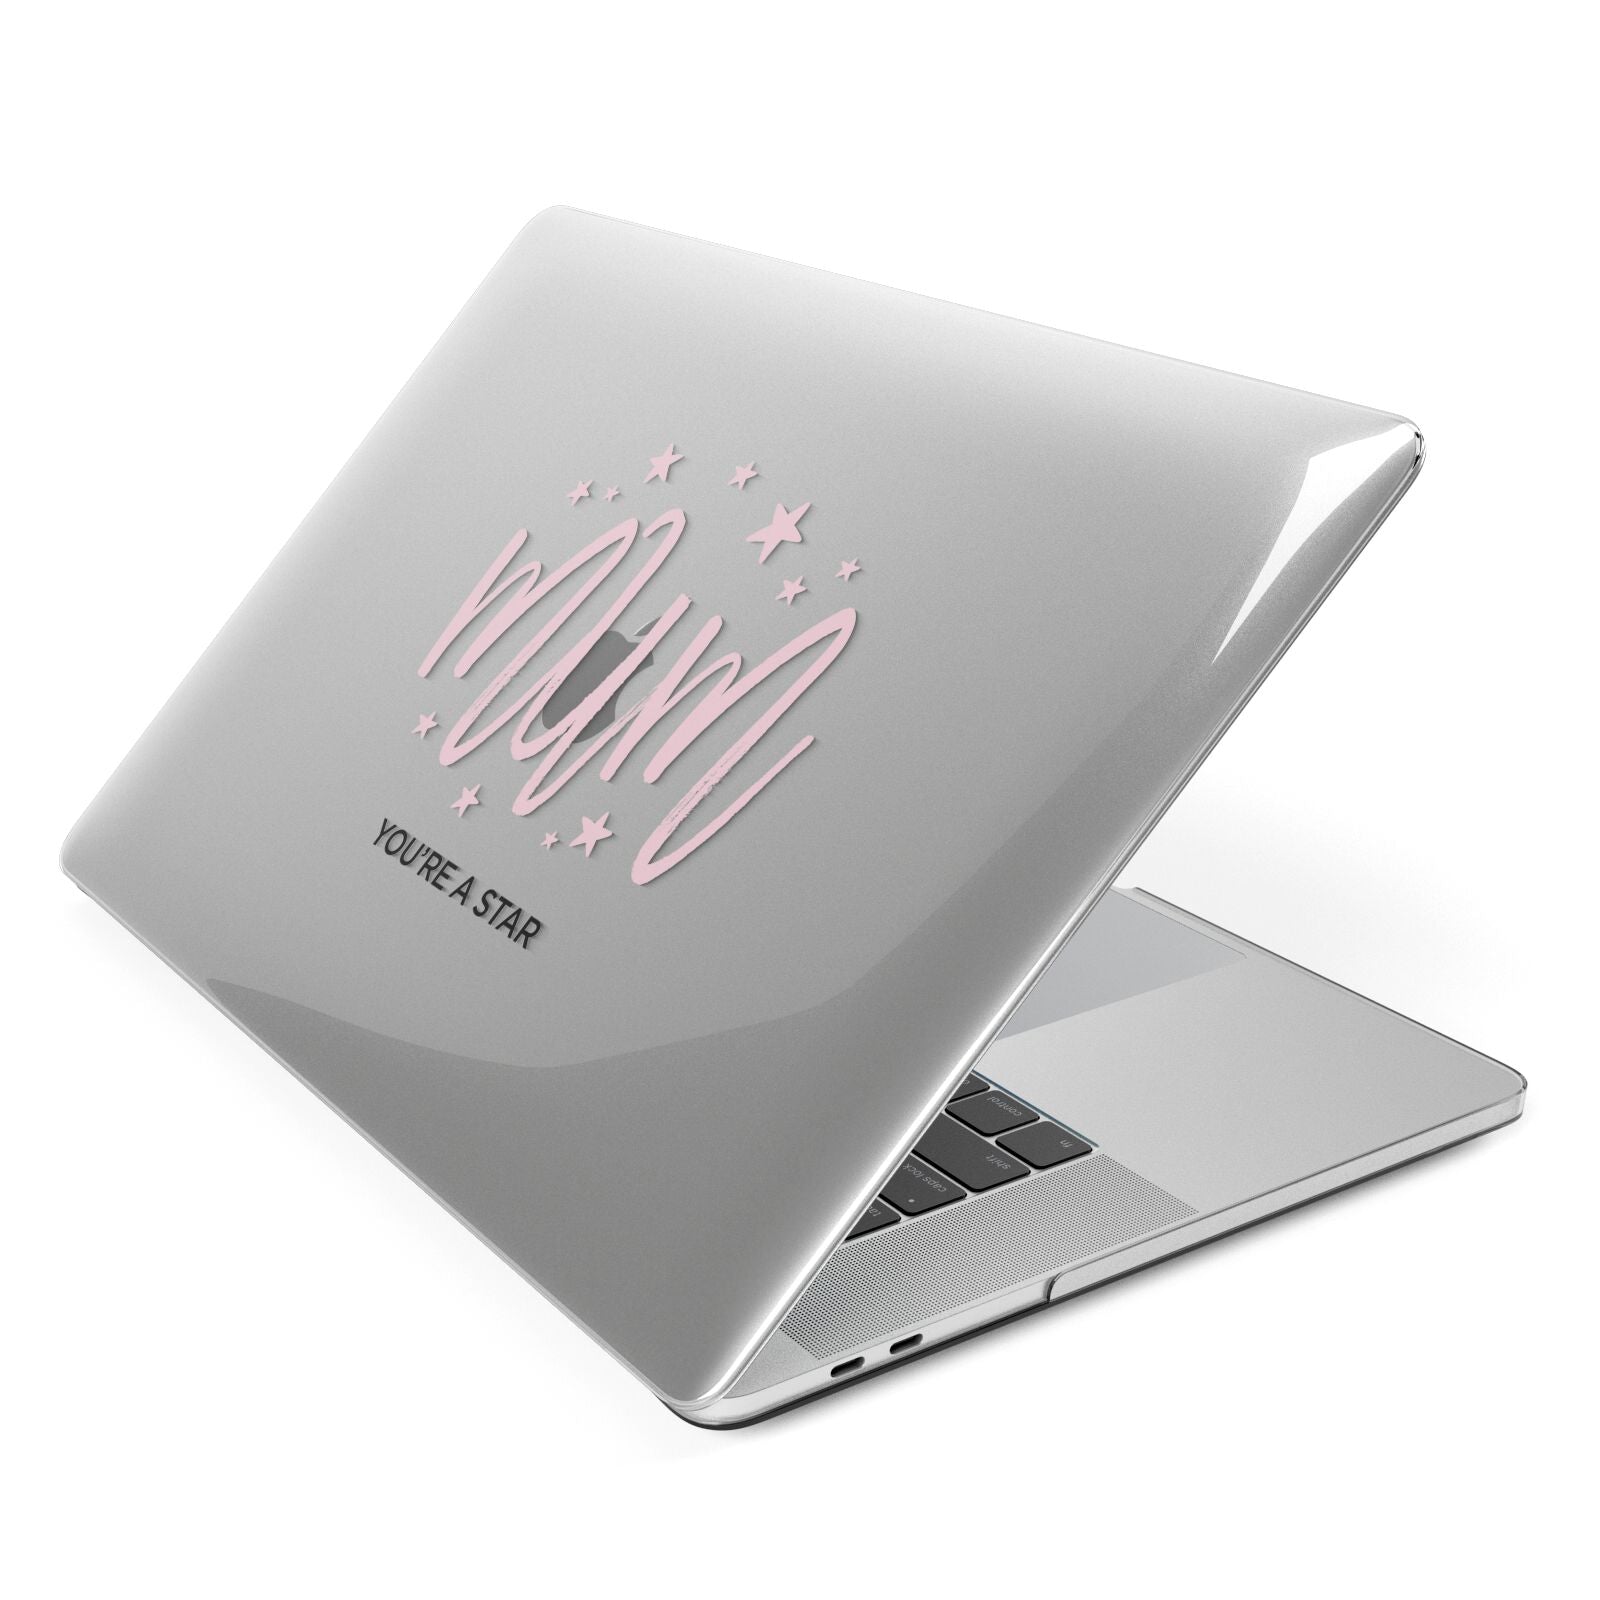 Mum Youre a Star Apple MacBook Case Side View